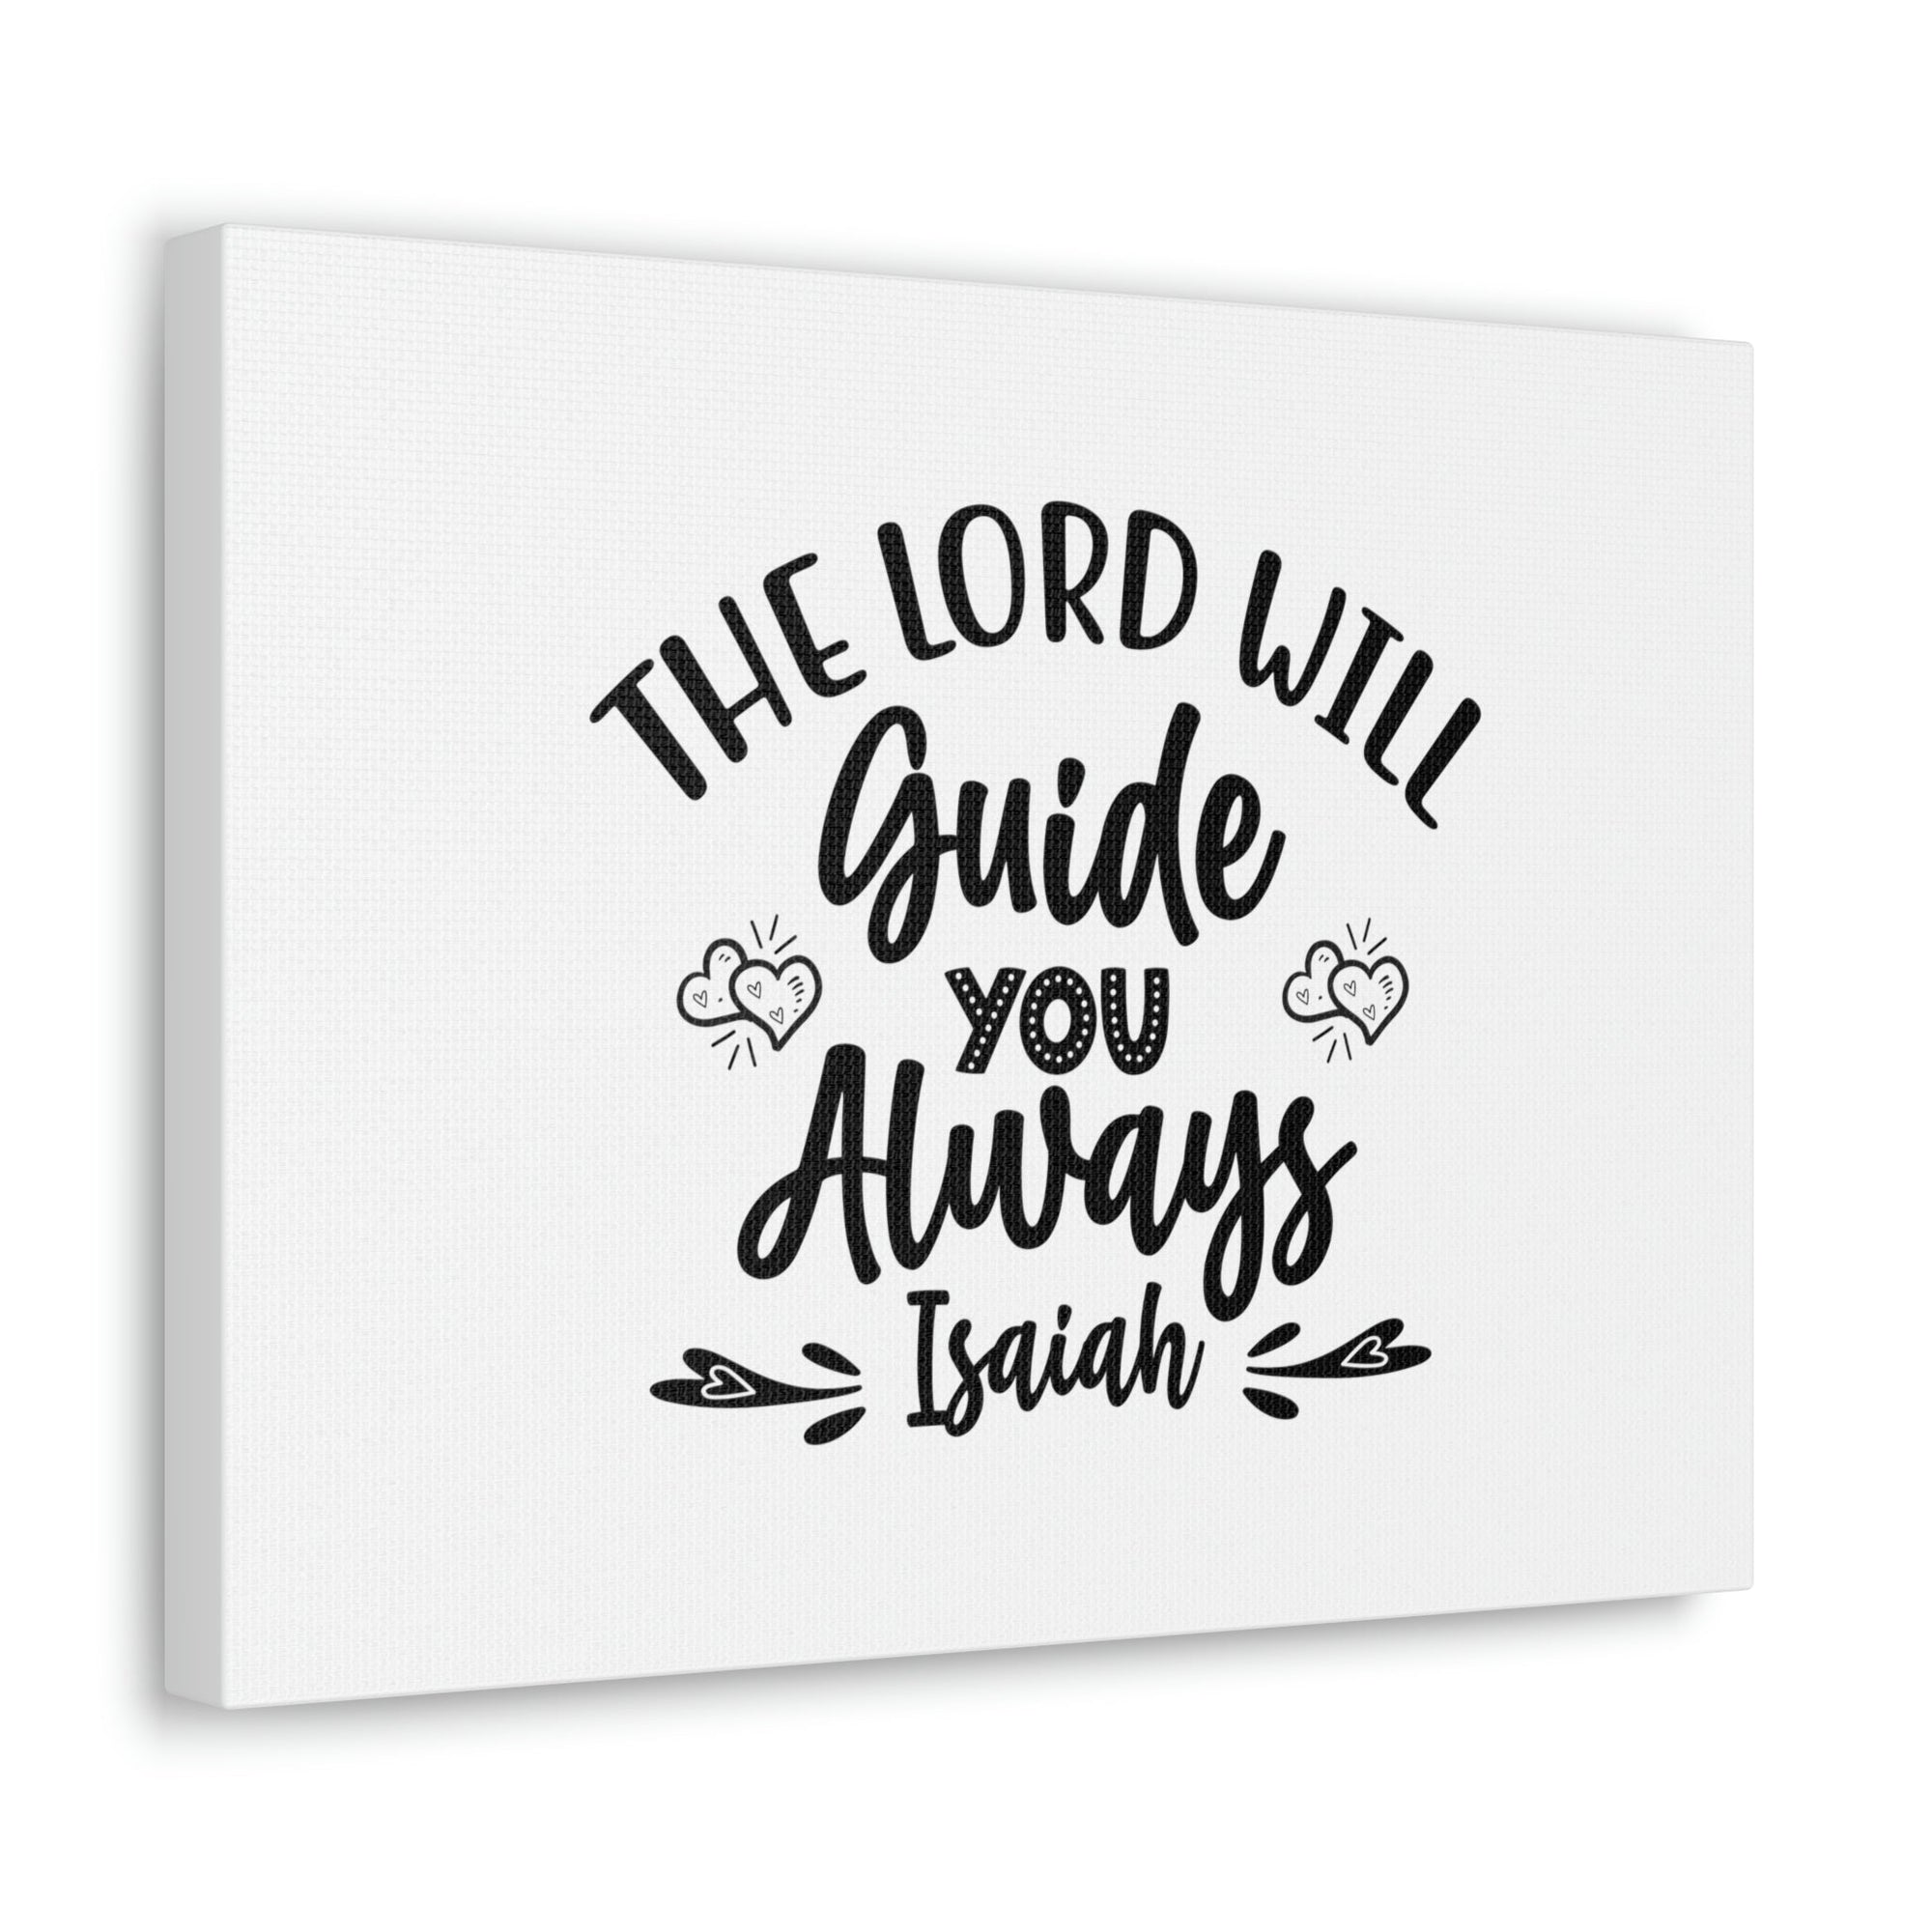 Scripture Walls Guide You Always Isaiah 58:11 Christian Wall Art Bible Verse Print Ready to Hang Unframed-Express Your Love Gifts